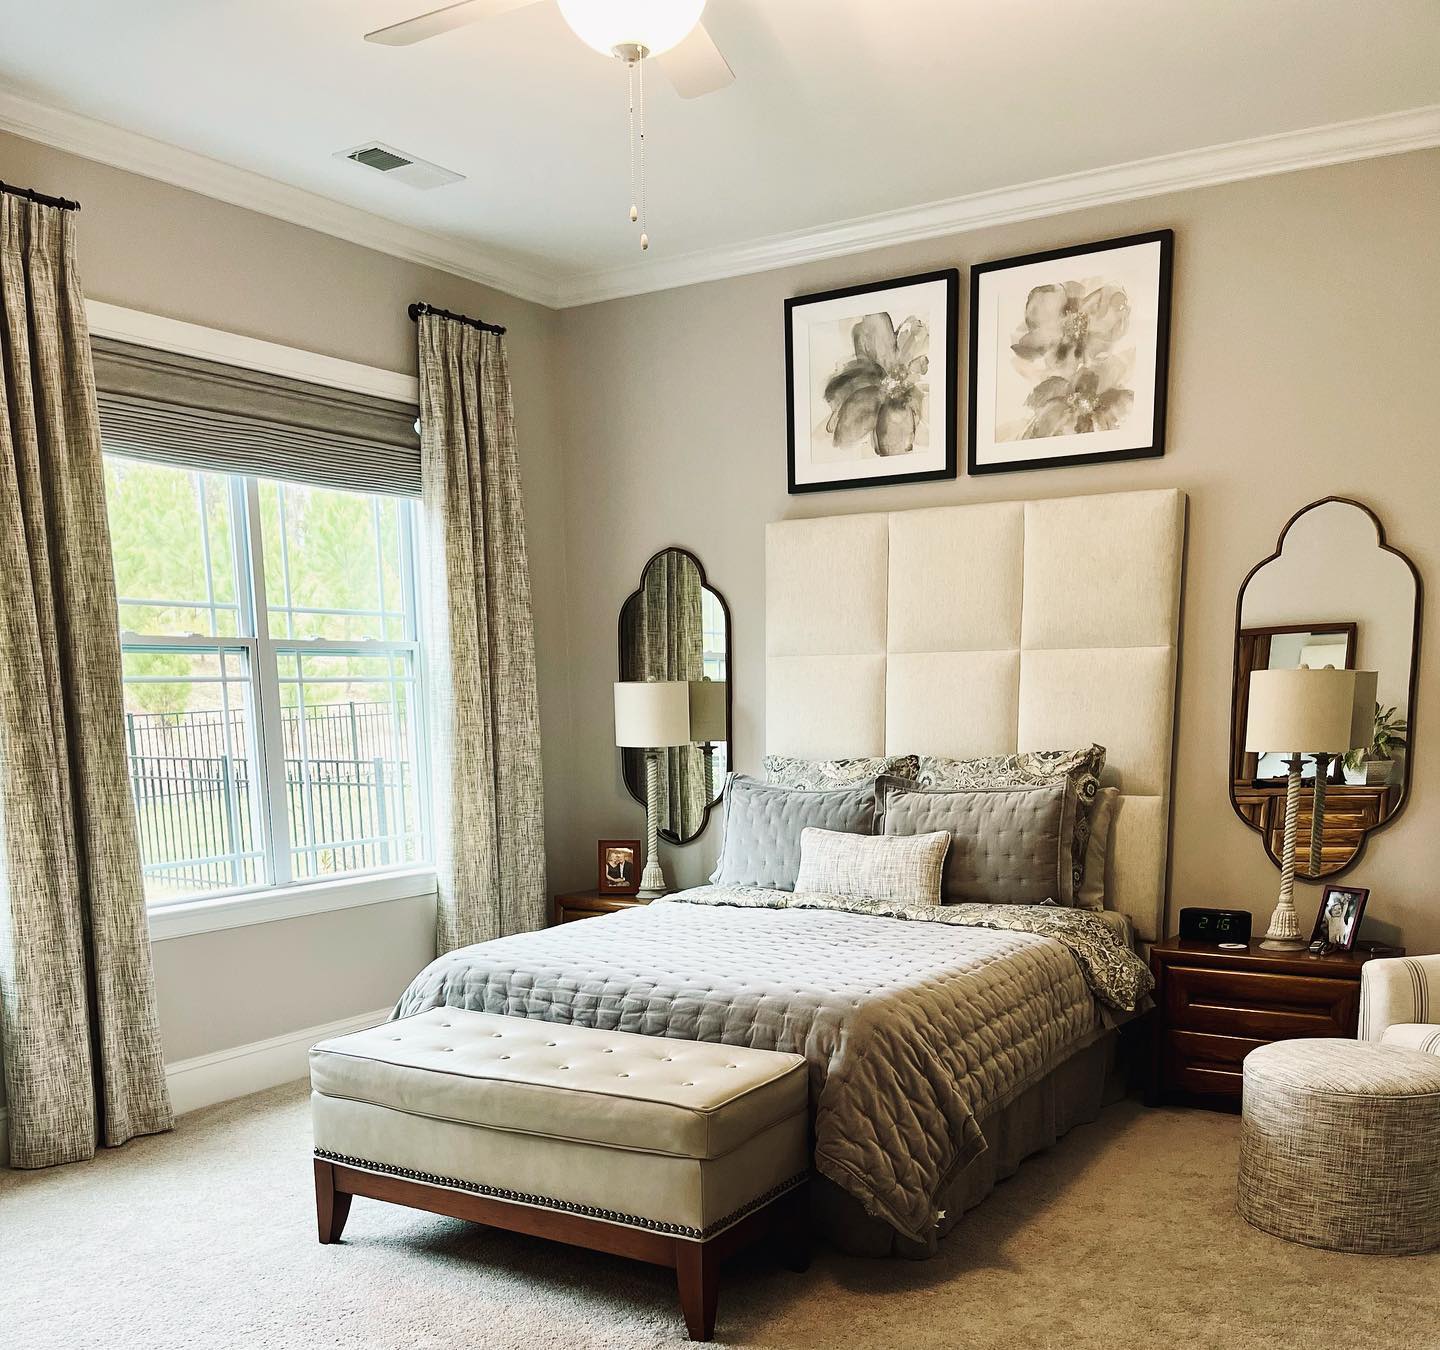 Photo showcasing a completed bedroom design project by Lori Savio 